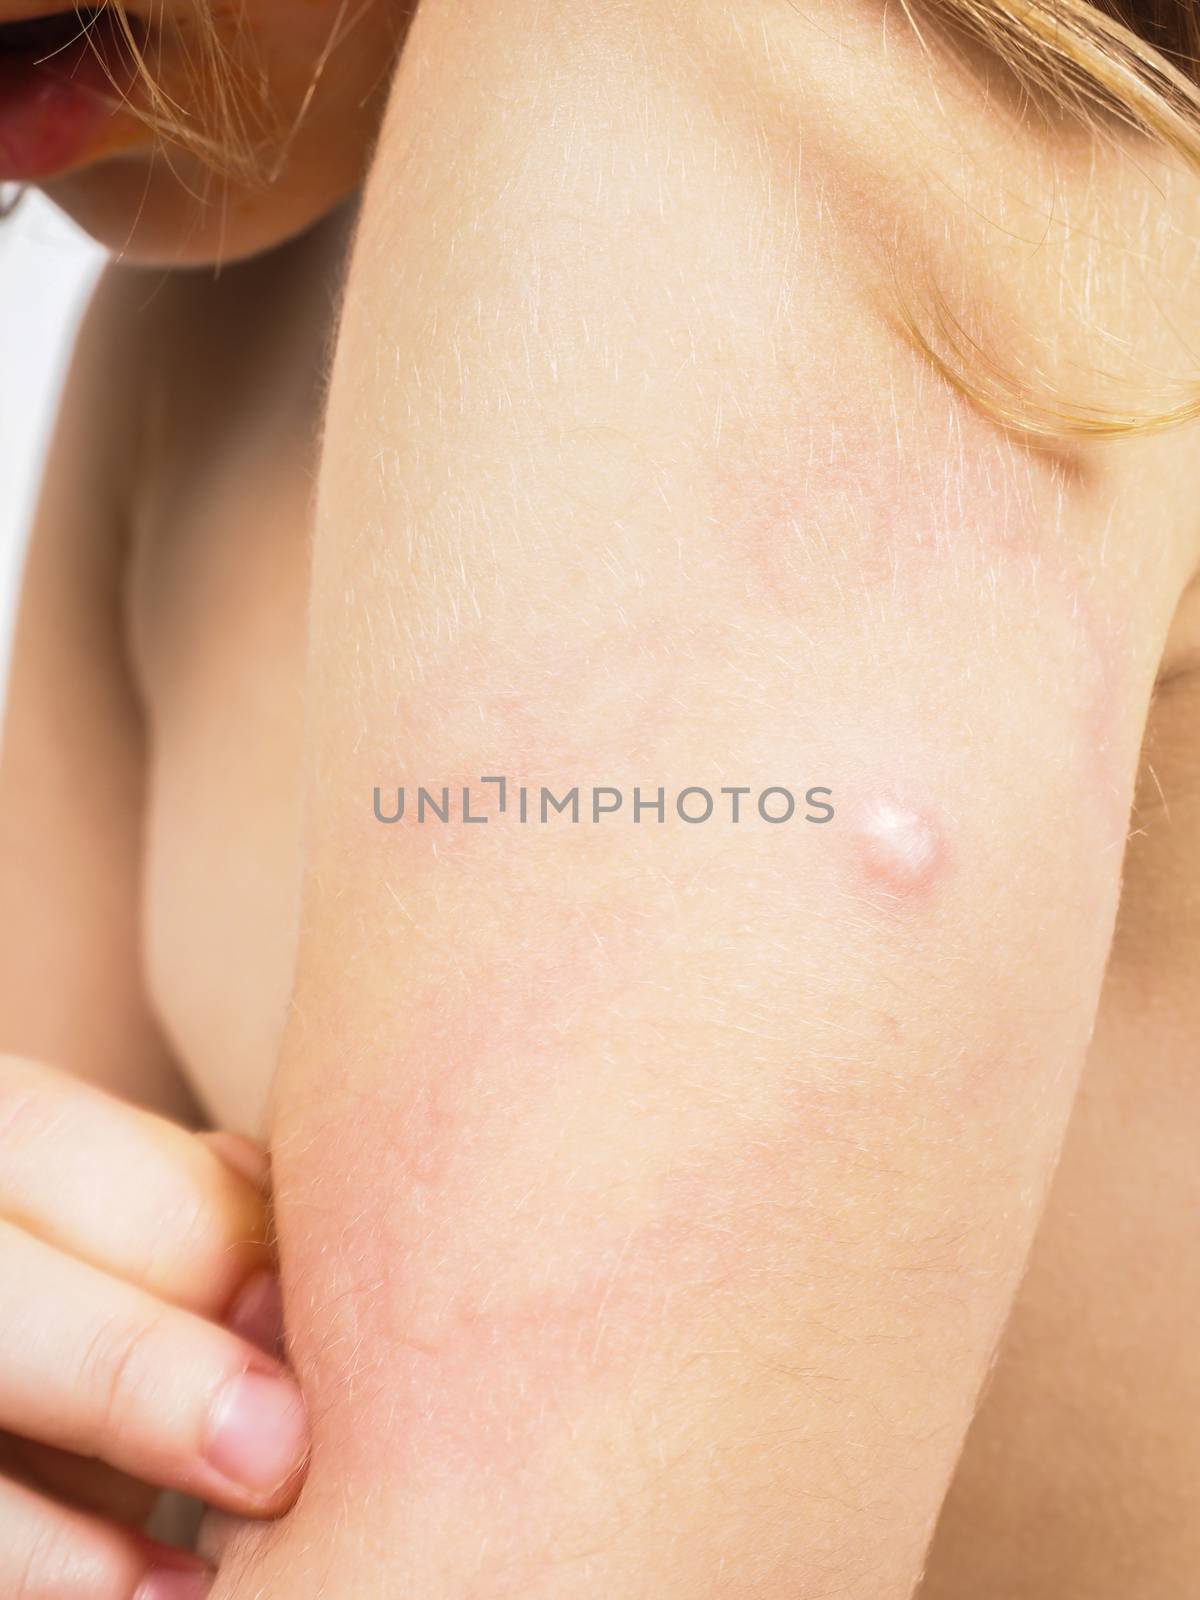 Child with hive, rash, or some skin abnormality on left arm under shoulder